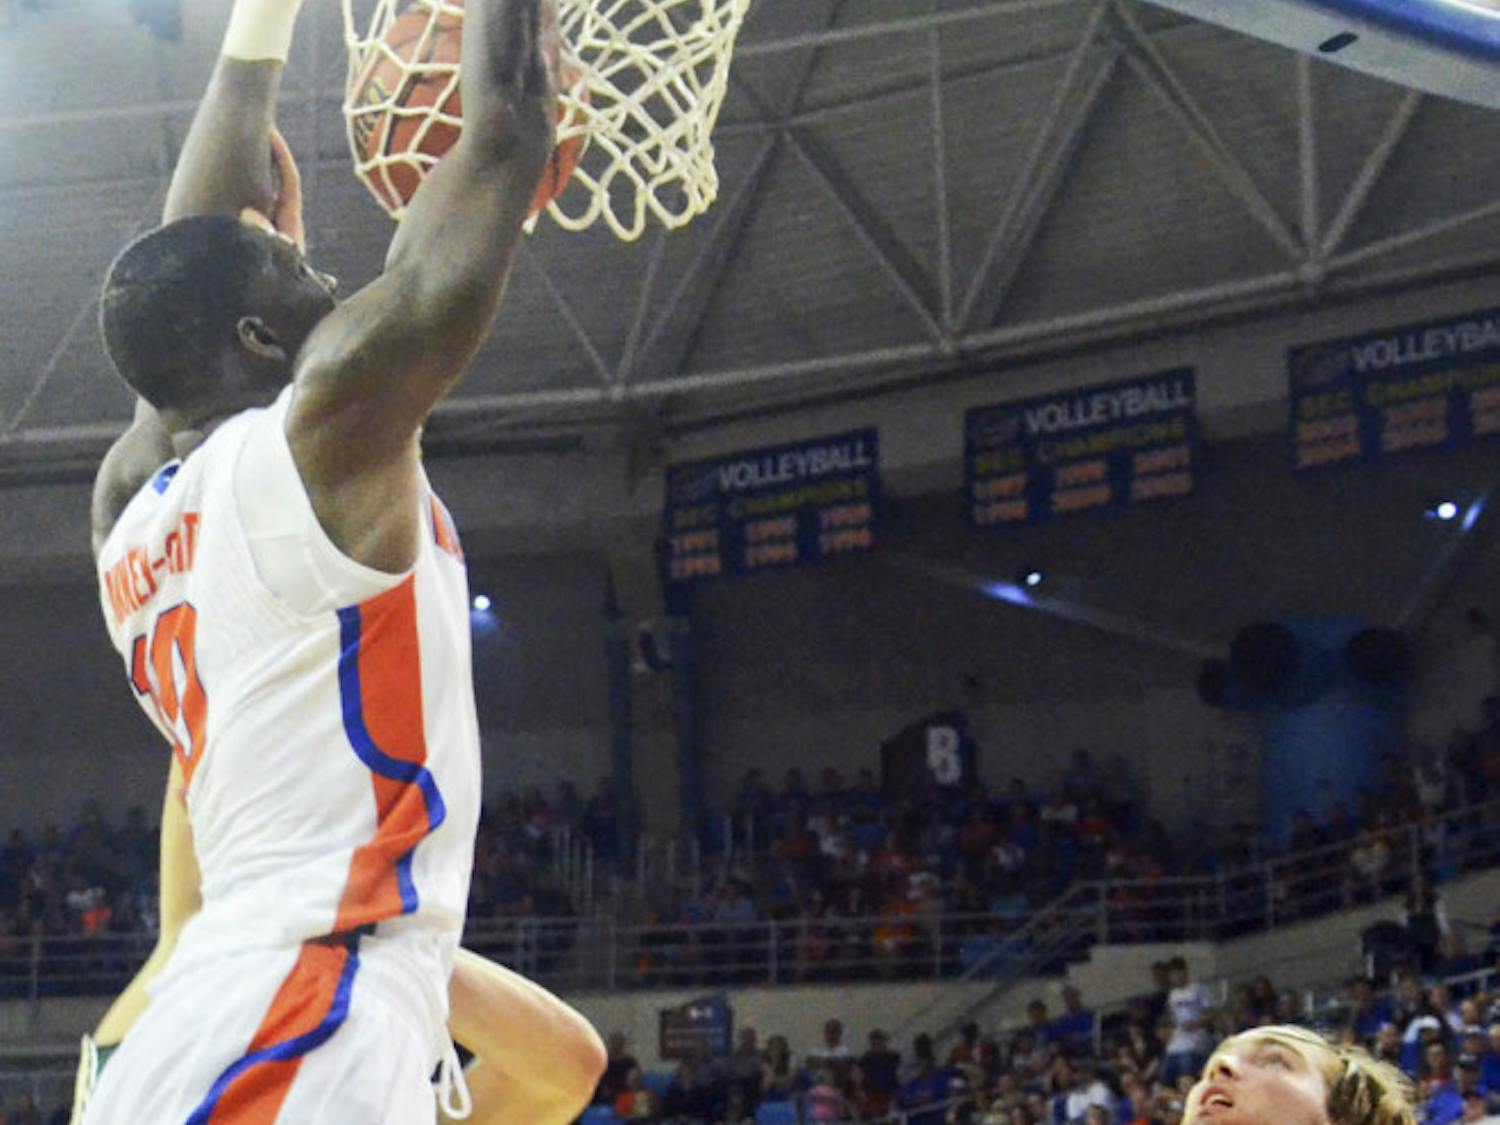 Dorian Finney-Smith dunks during Florida's win against William &amp; Mary on Friday in the O'Connell Center